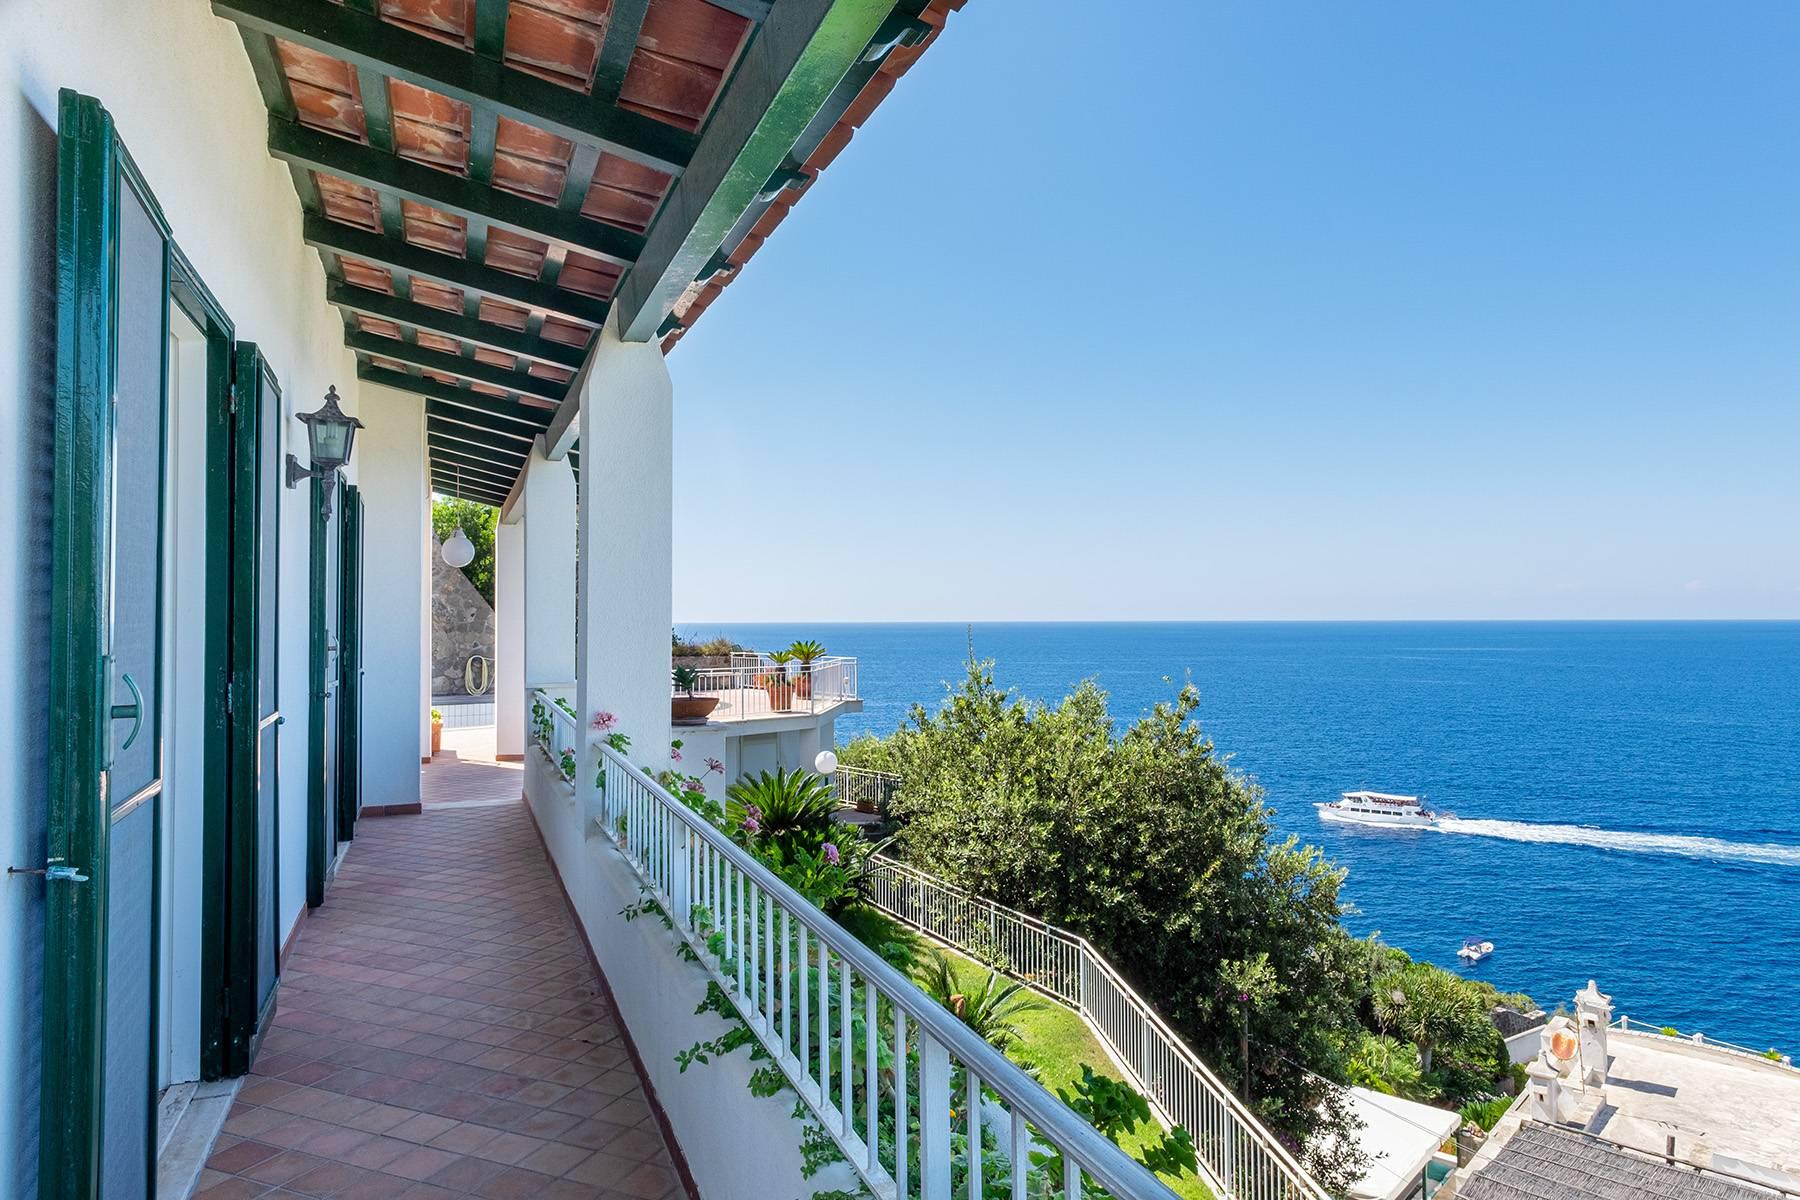 Mediterranean Villa pied dans l'eau with pool and private access to the sea - 10